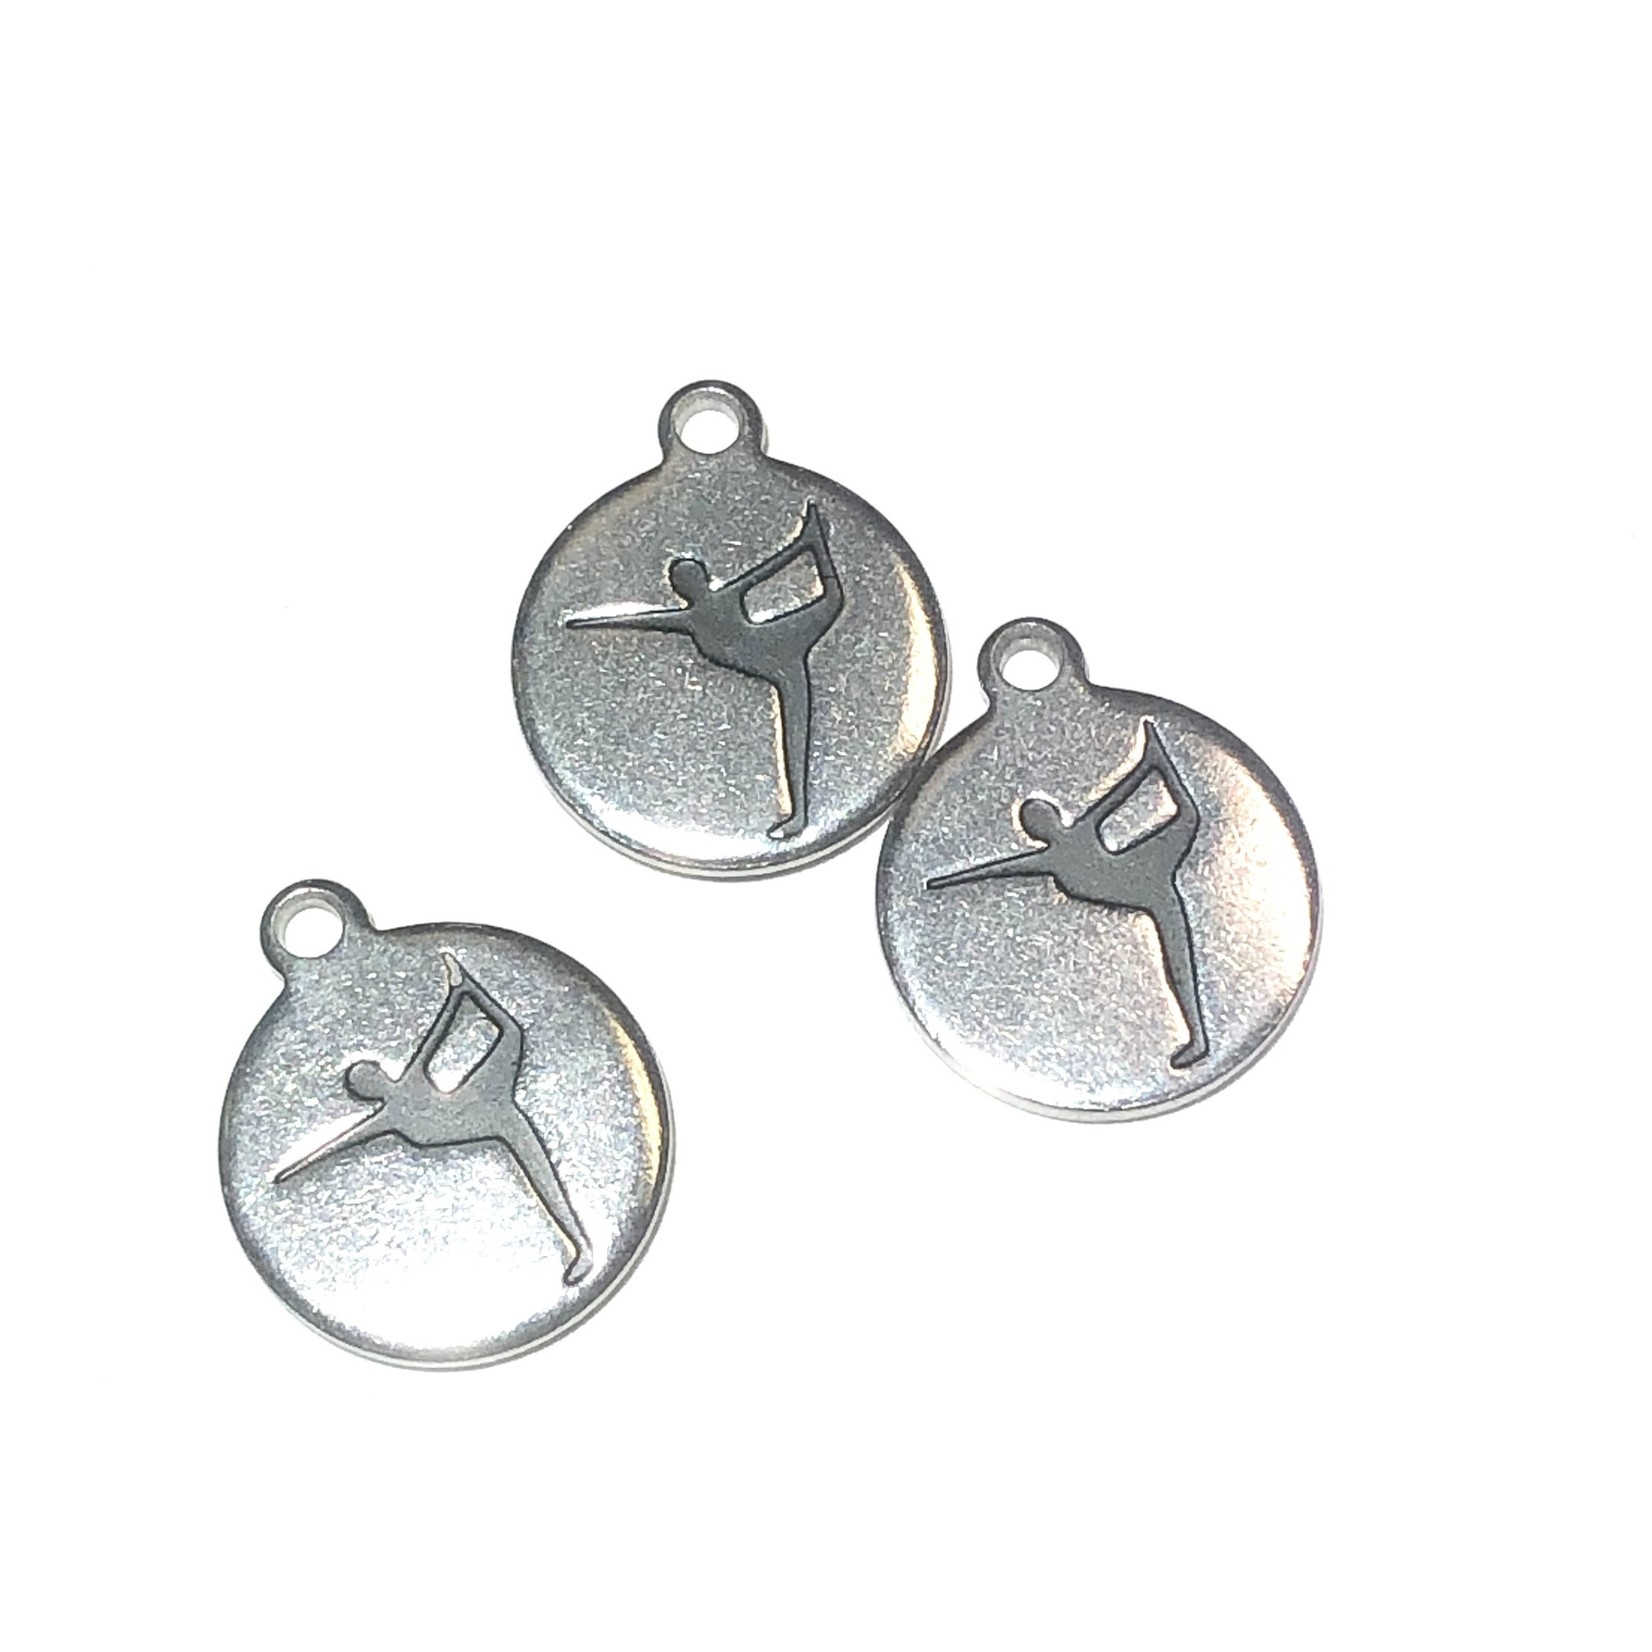 Stainless Steel Yoga Pose Charms 3pcs/Pkg